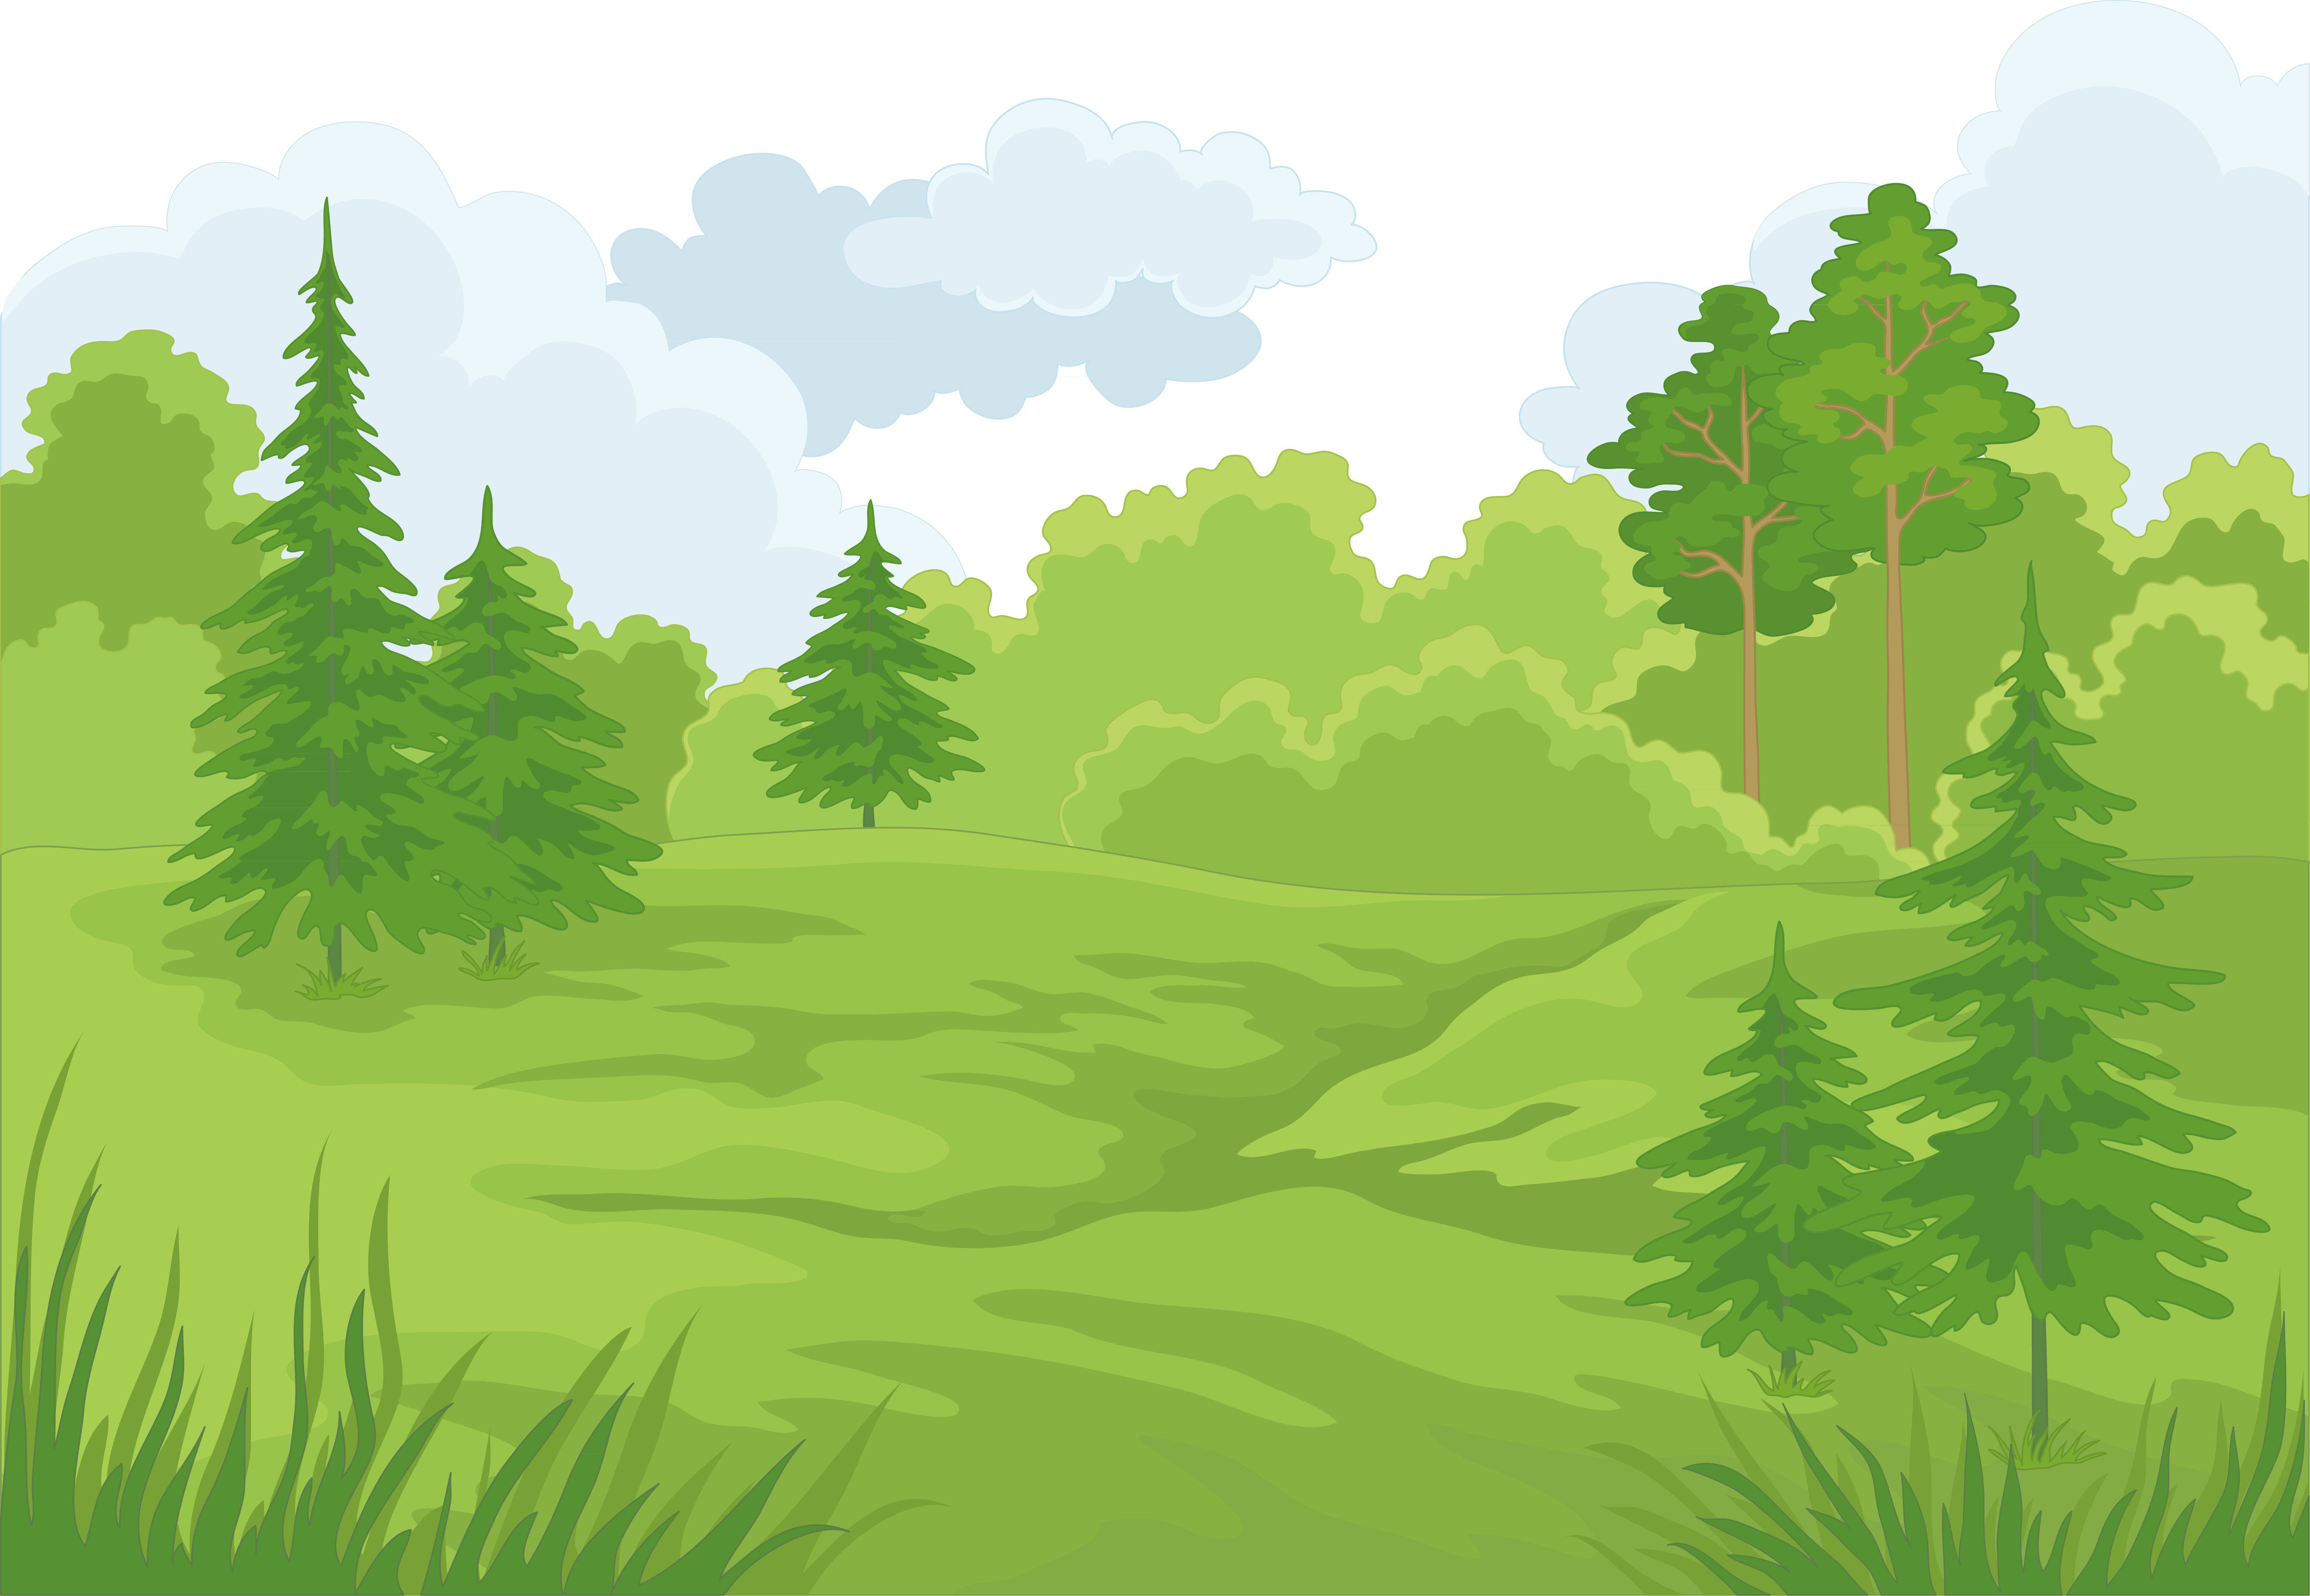 Forest Background Clipart Transparent and other clipart images on